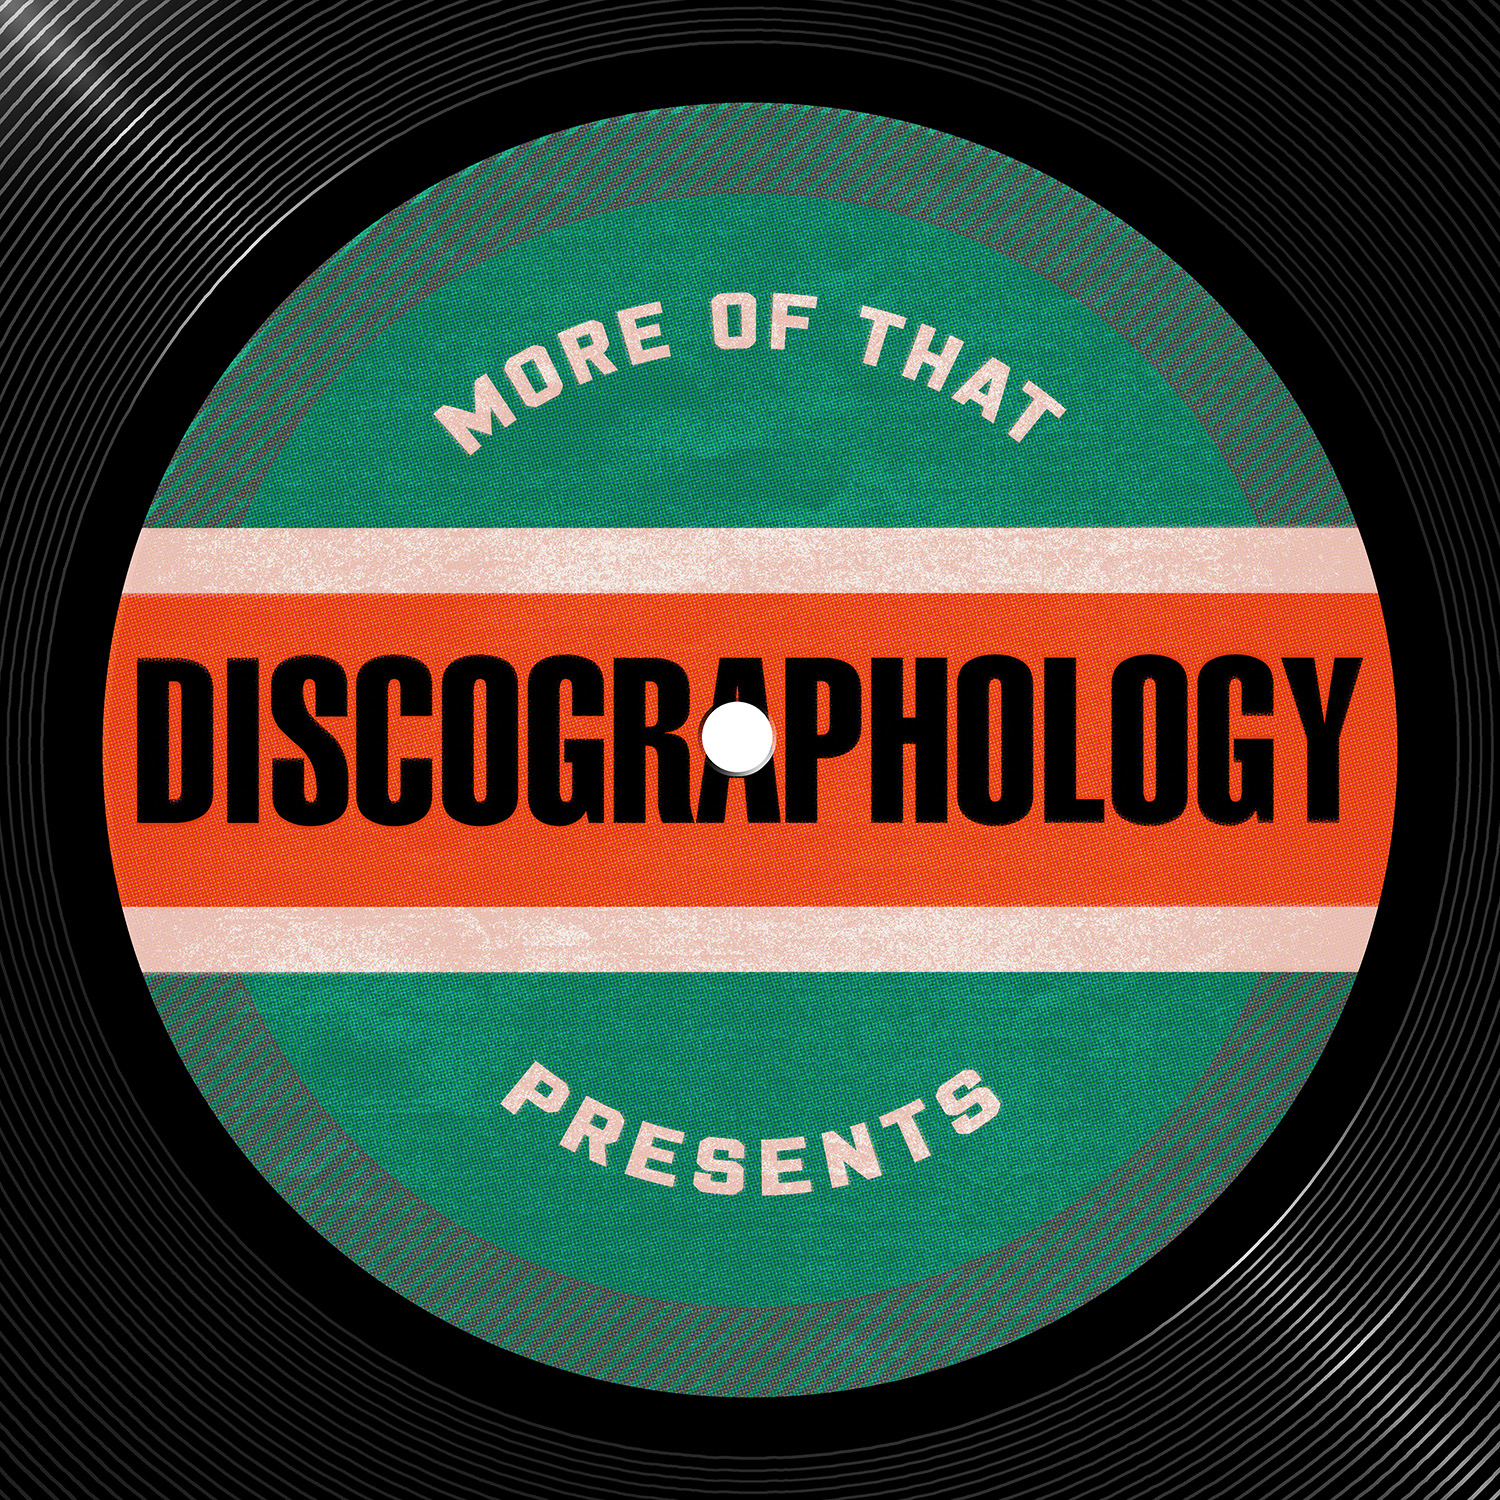 More Of That Presents: Discographology